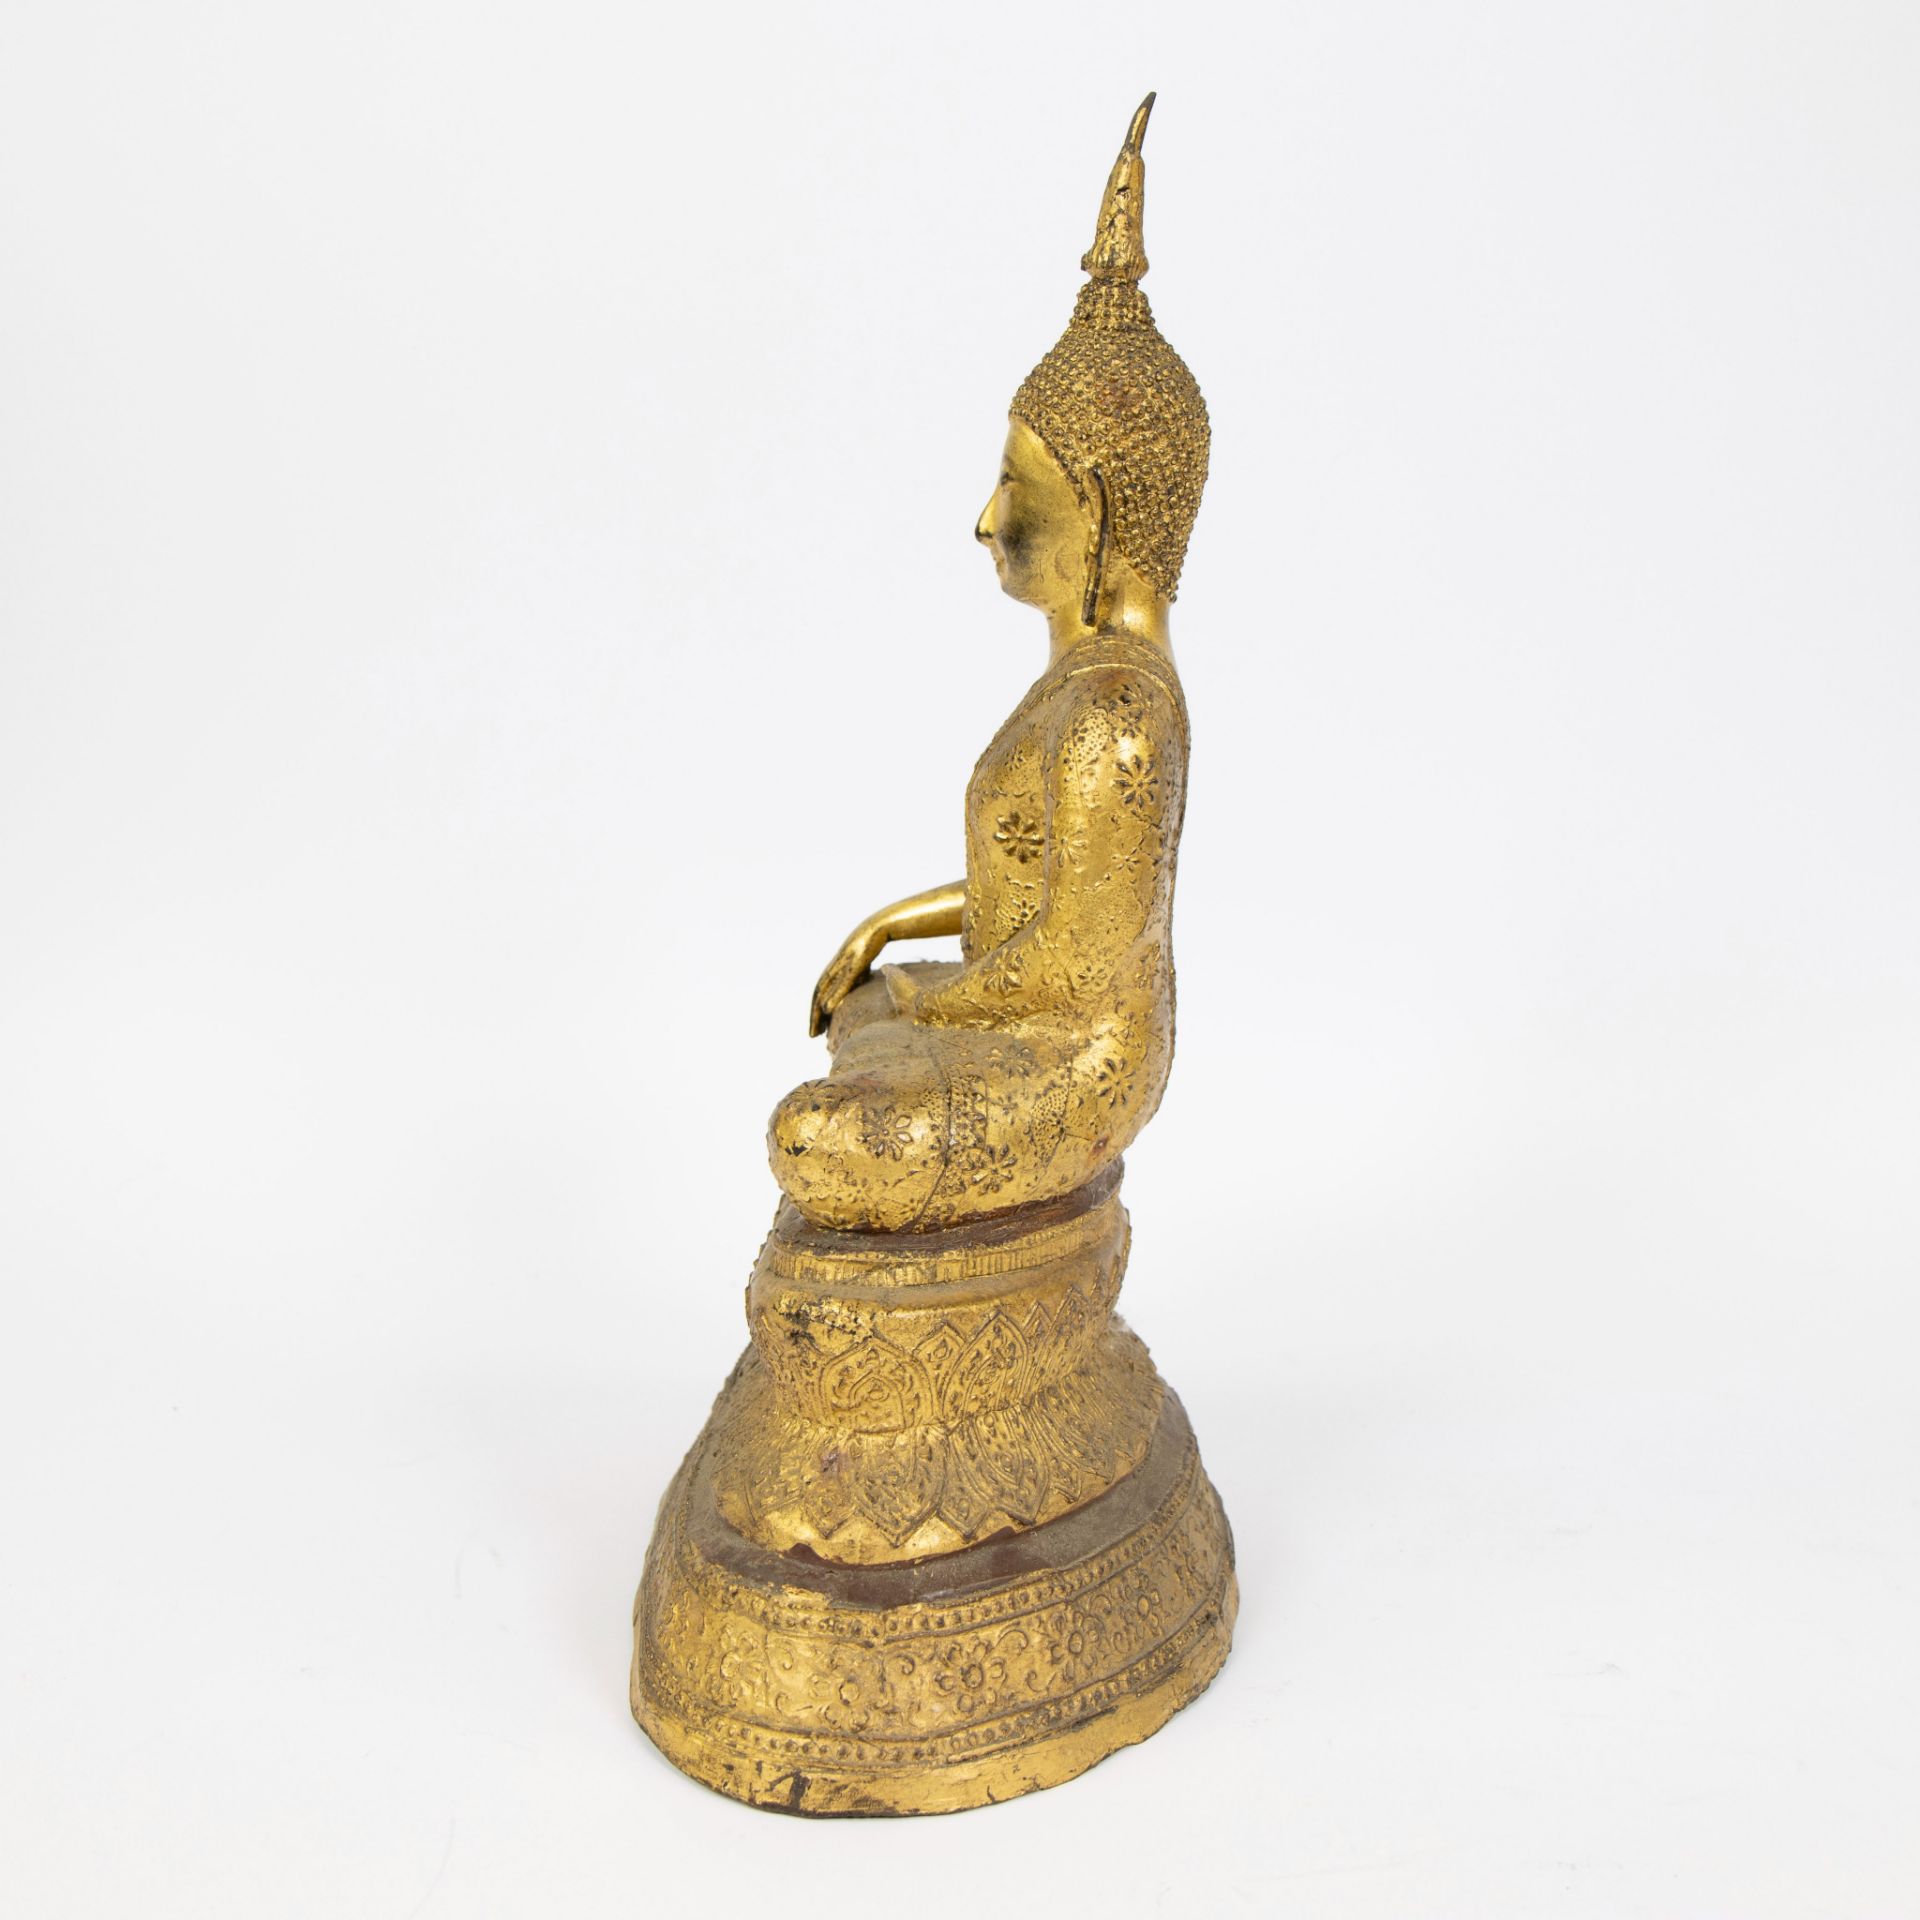 A gilded statue of Buddha seated in lotus position, Thailand - Image 2 of 5